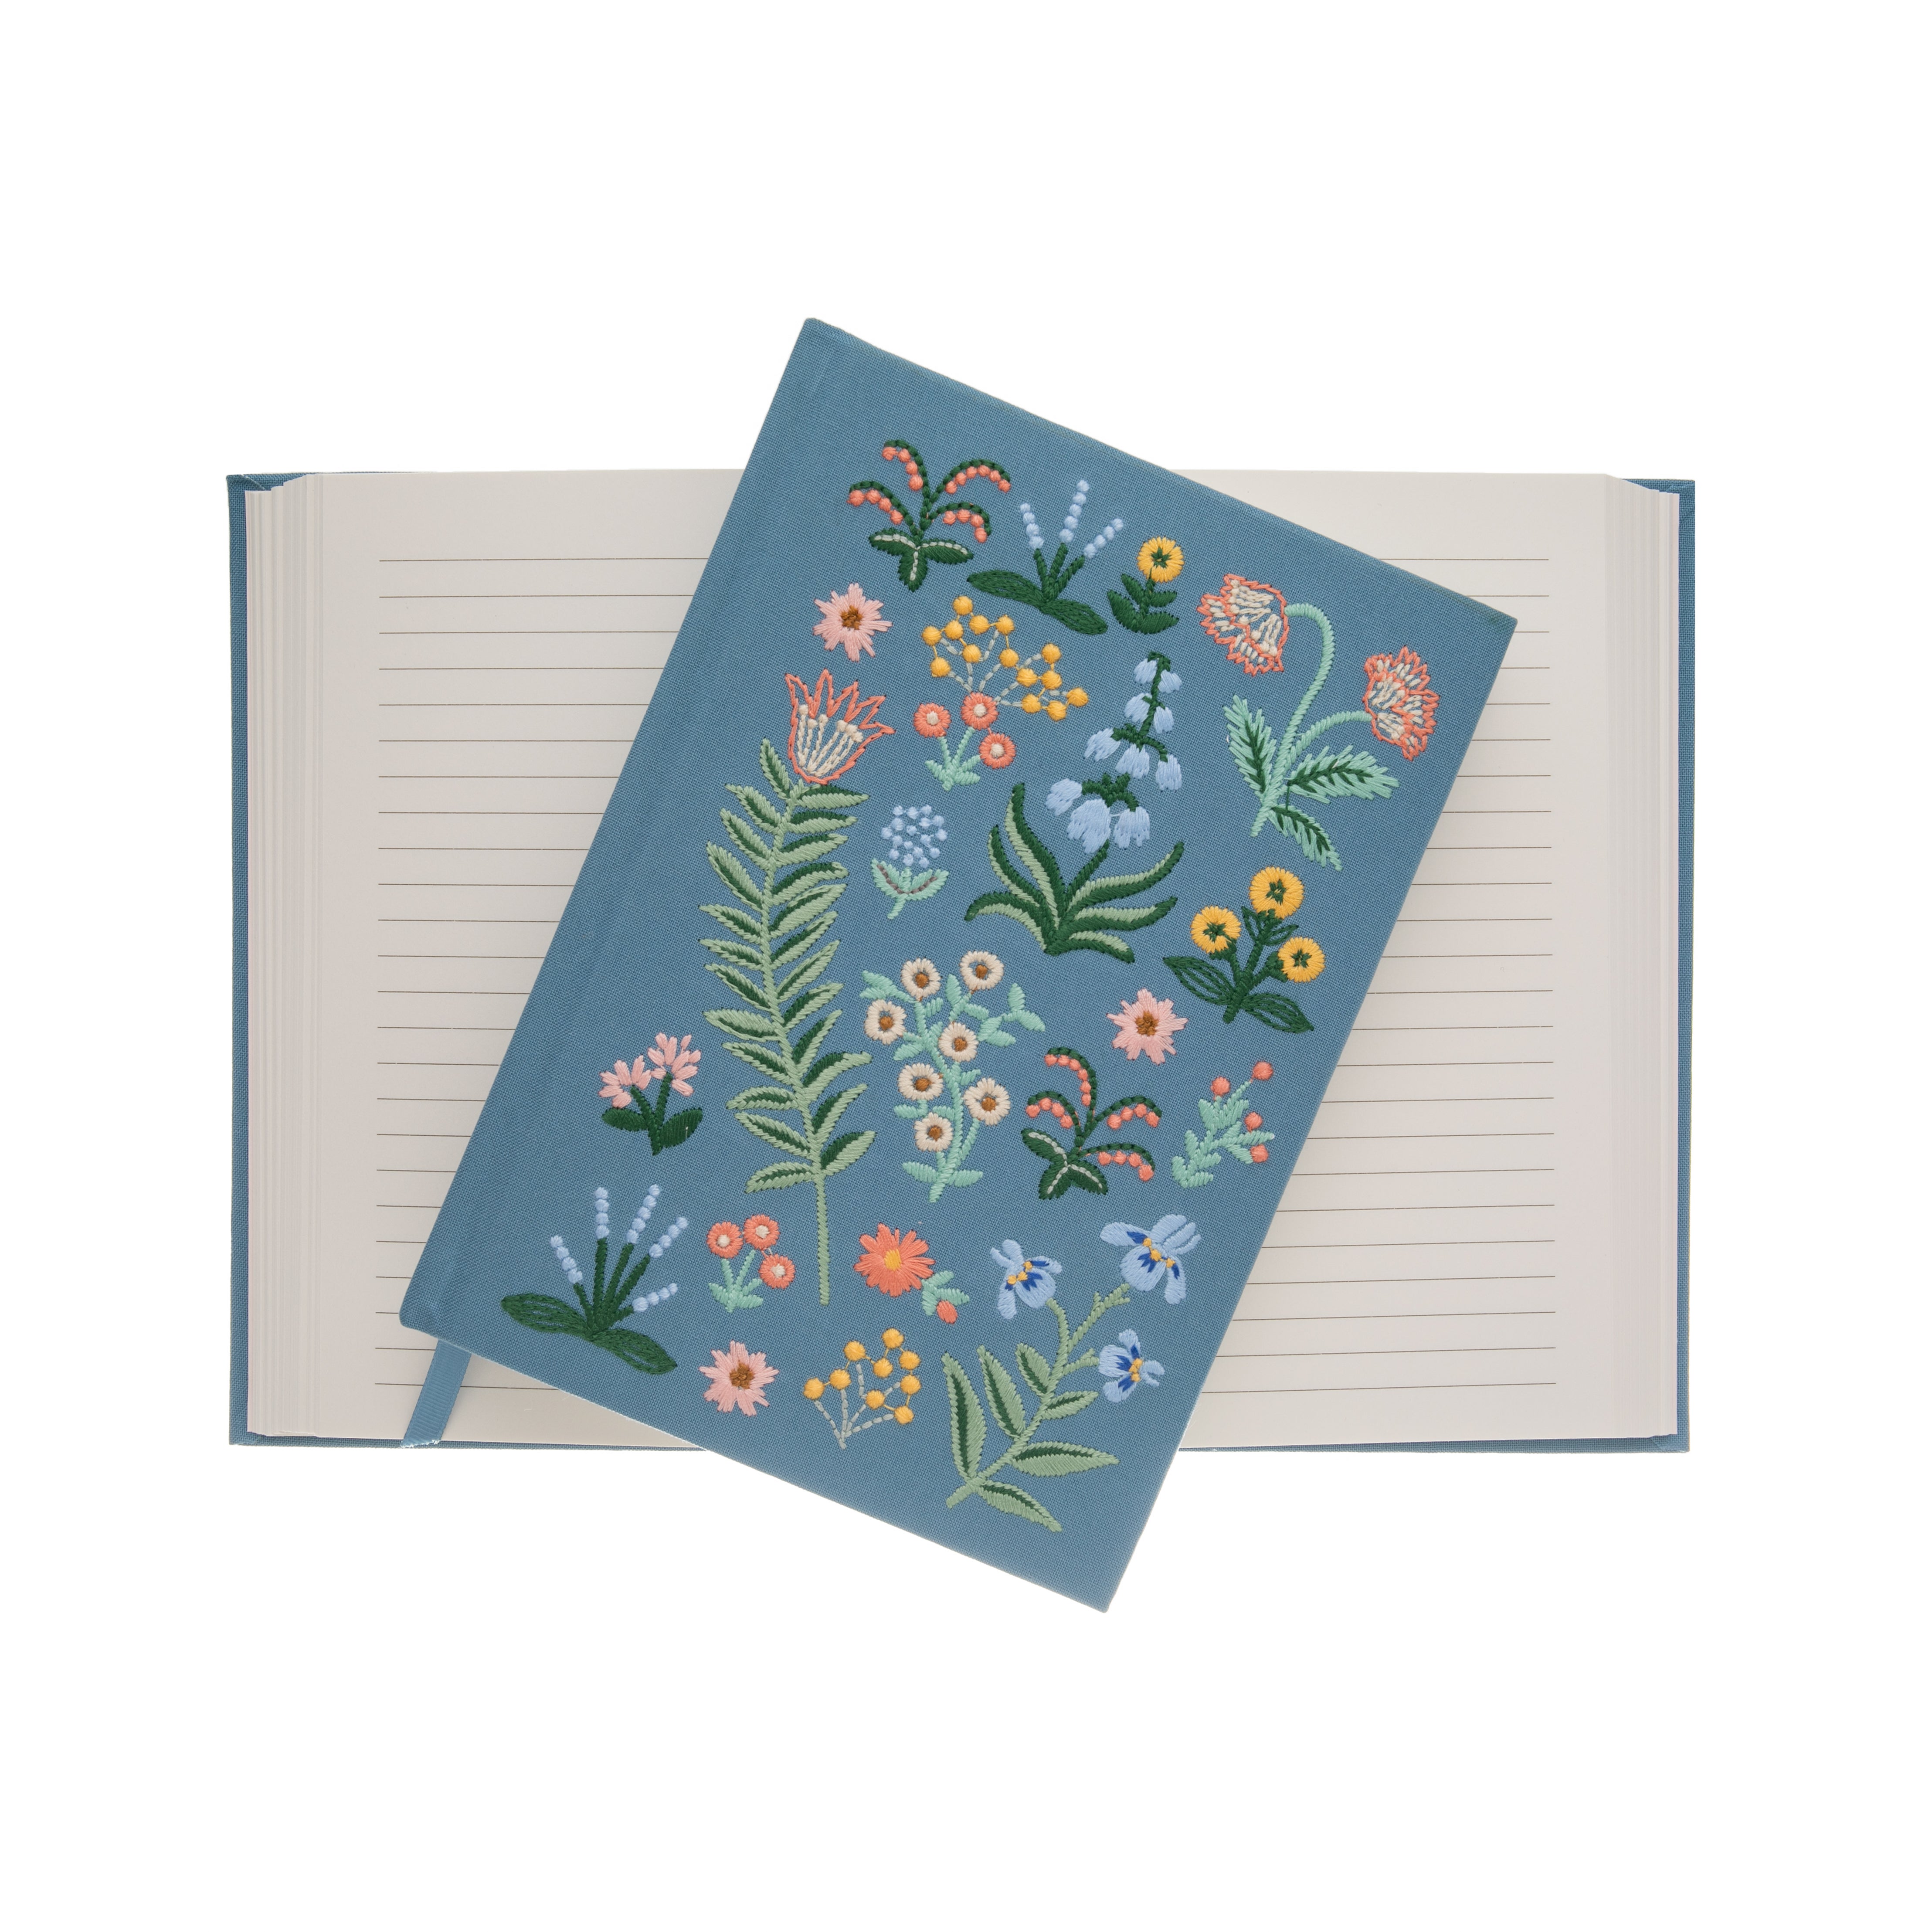 MENAGERIE GARDEN EMBROIDERED JOURNAL – The Huntington Store